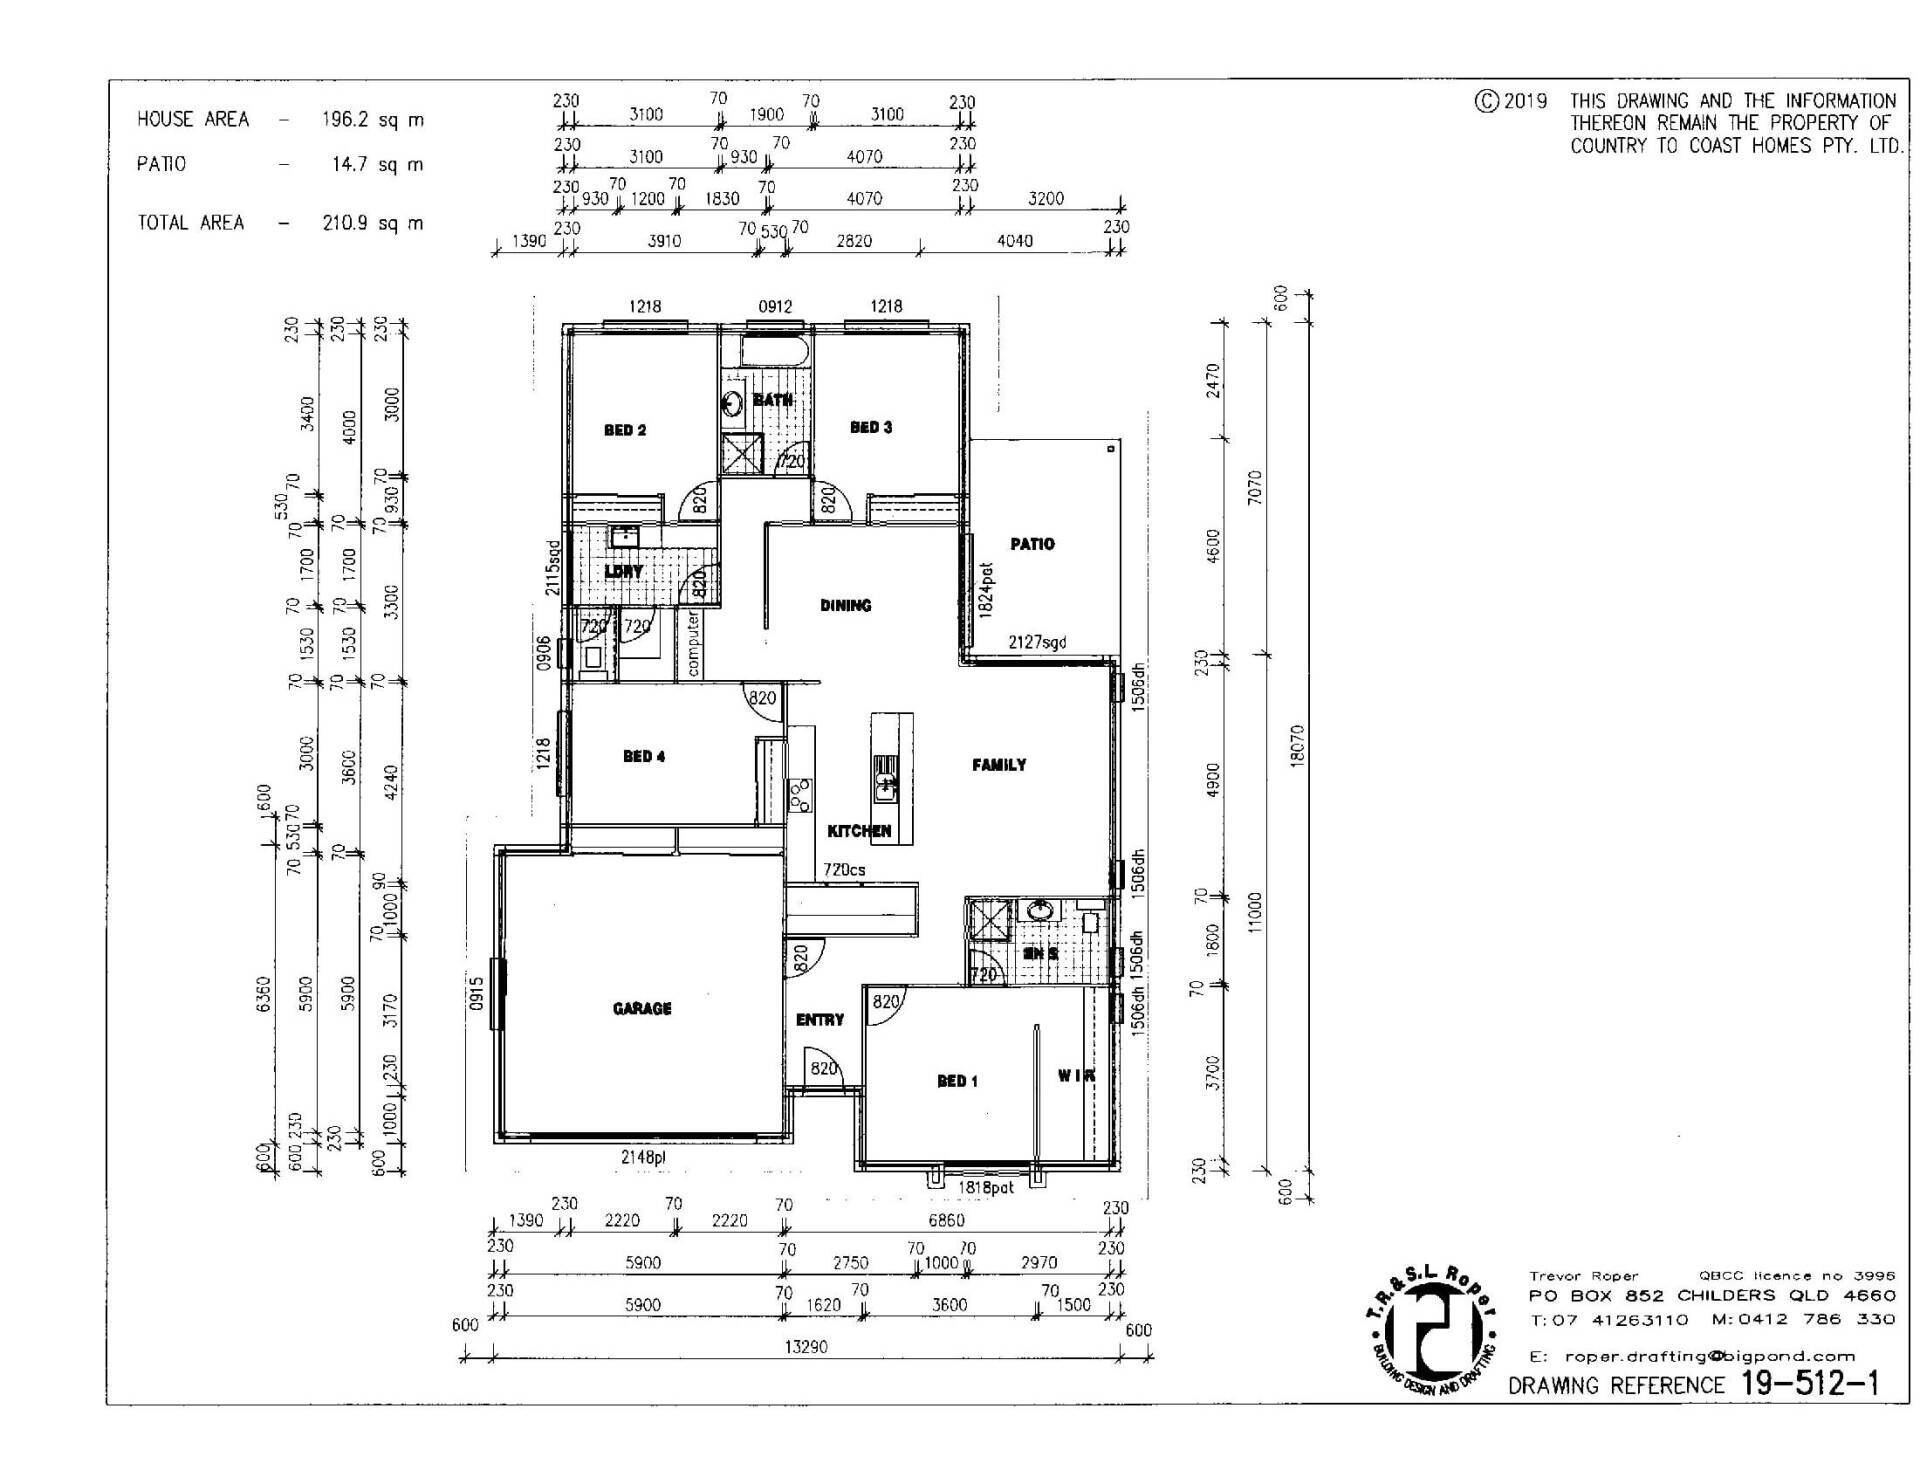 Basic House Plan with Vertical Layout — Country to Coast Homes in Logging Creek Rd, QLD